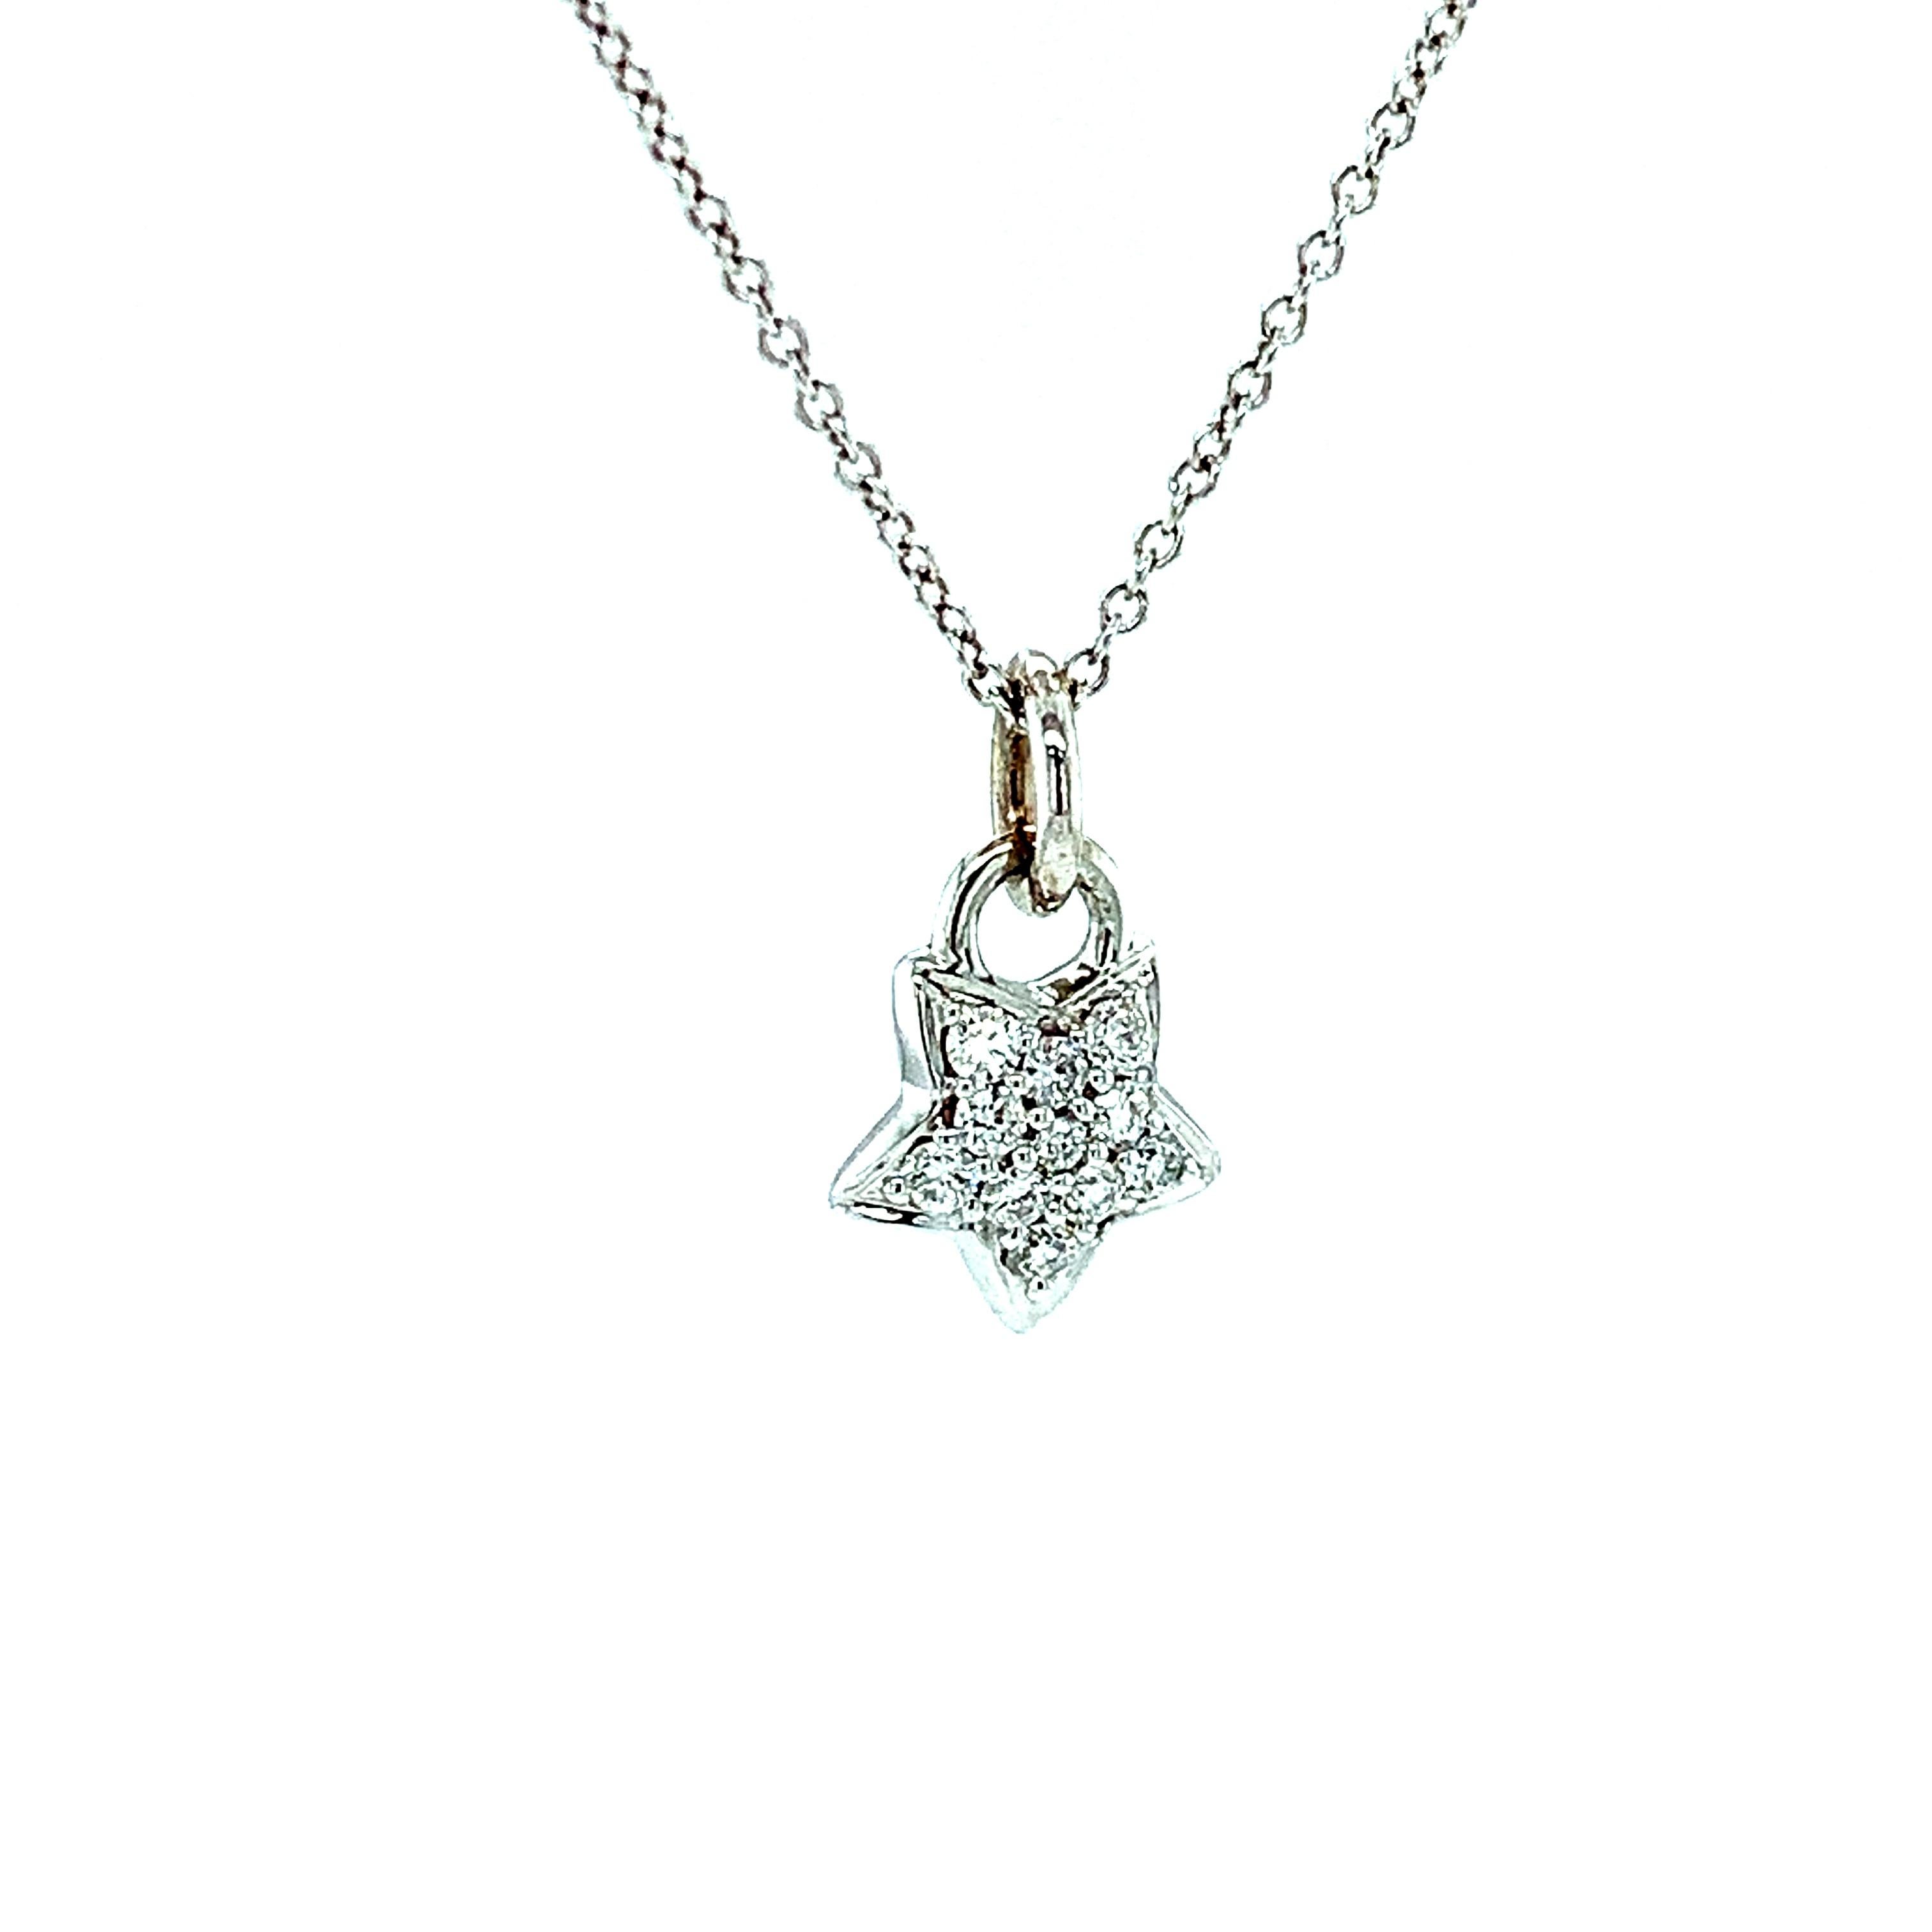 dancing star necklace